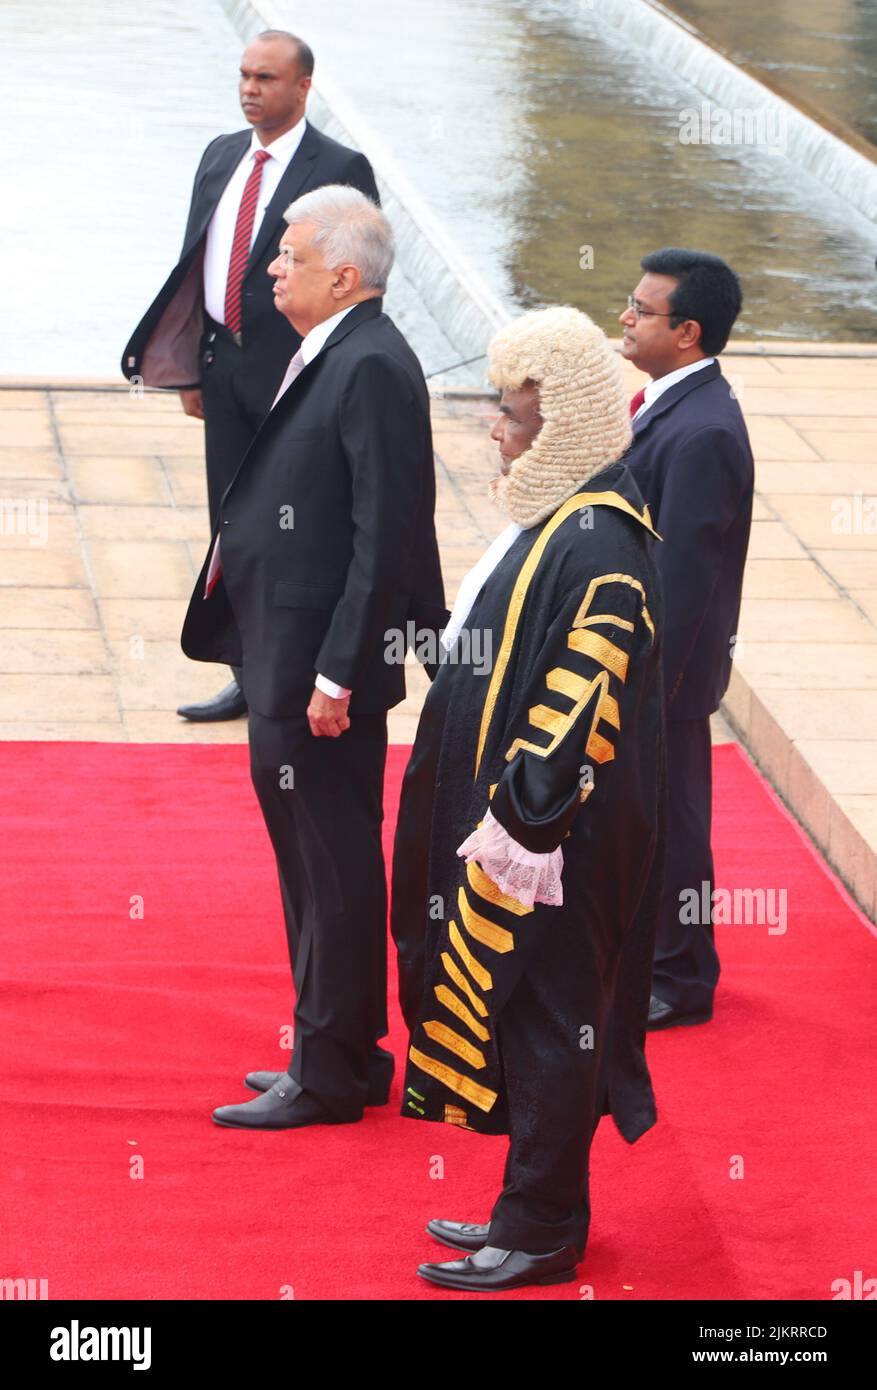 (220803) -- COLOMBO, Aug. 3, 2022 (Xinhua) -- Sri Lankan President Ranil Wickremesinghe receives the guard of honor for the ceremonial opening of the third session of the 9th Parliament in Sri Jayawardenepura Kotte, Sri Lanka, Aug. 3, 2022. Sri Lankan President Ranil Wickremesinghe on Wednesday urged political parties to join him in establishing an all-party government that can lead Sri Lanka out of the economic crisis. Credit: Xinhua/Alamy Live News Stock Photo